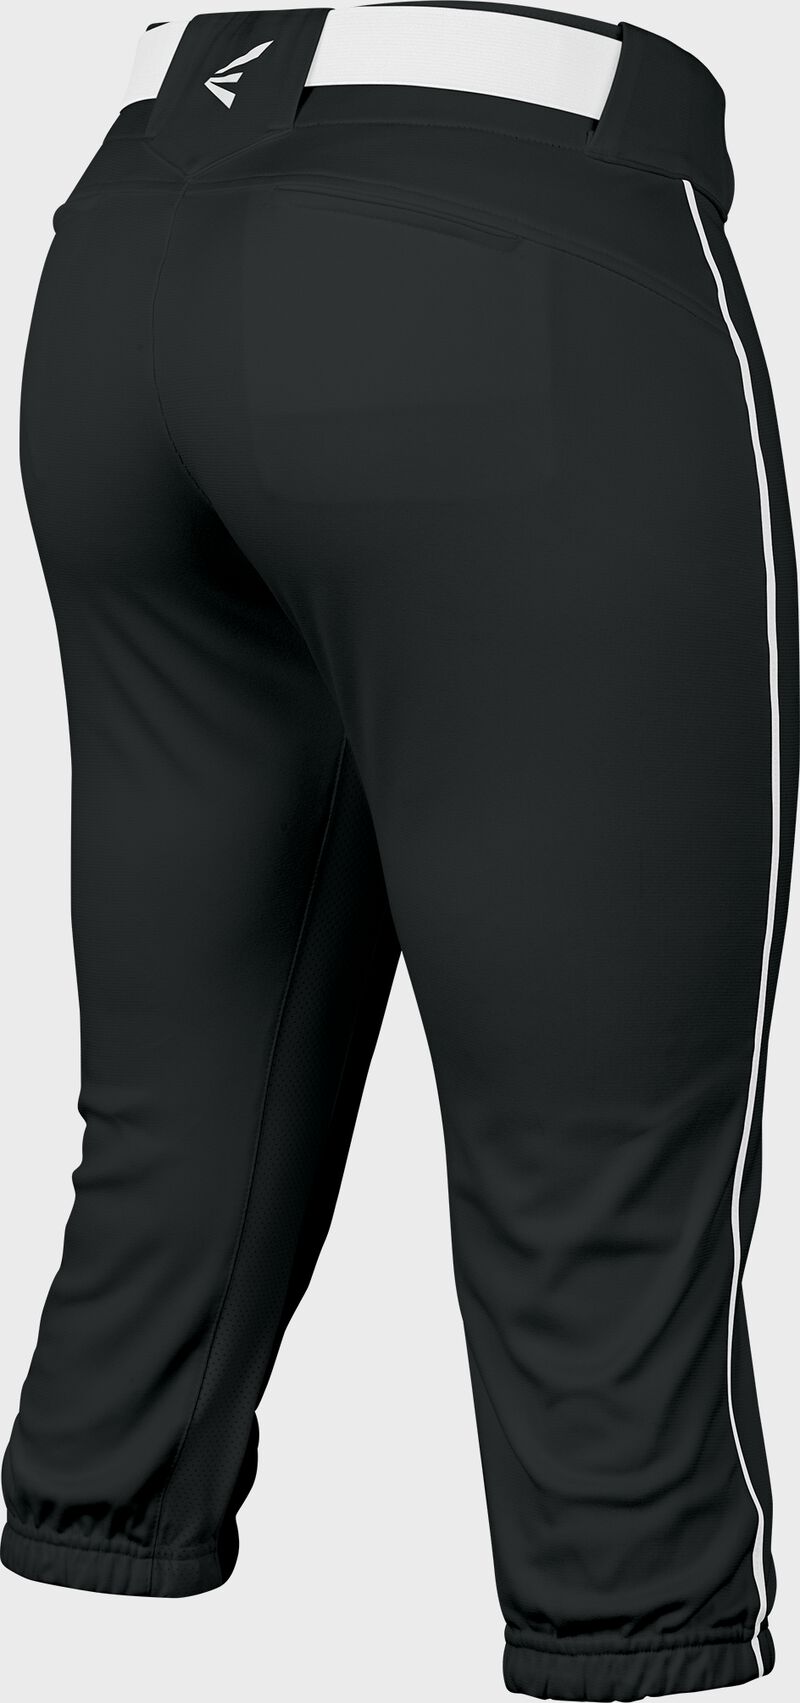 Easton Prowess Softball Pant Women's Piped BLACK/WHITE  S